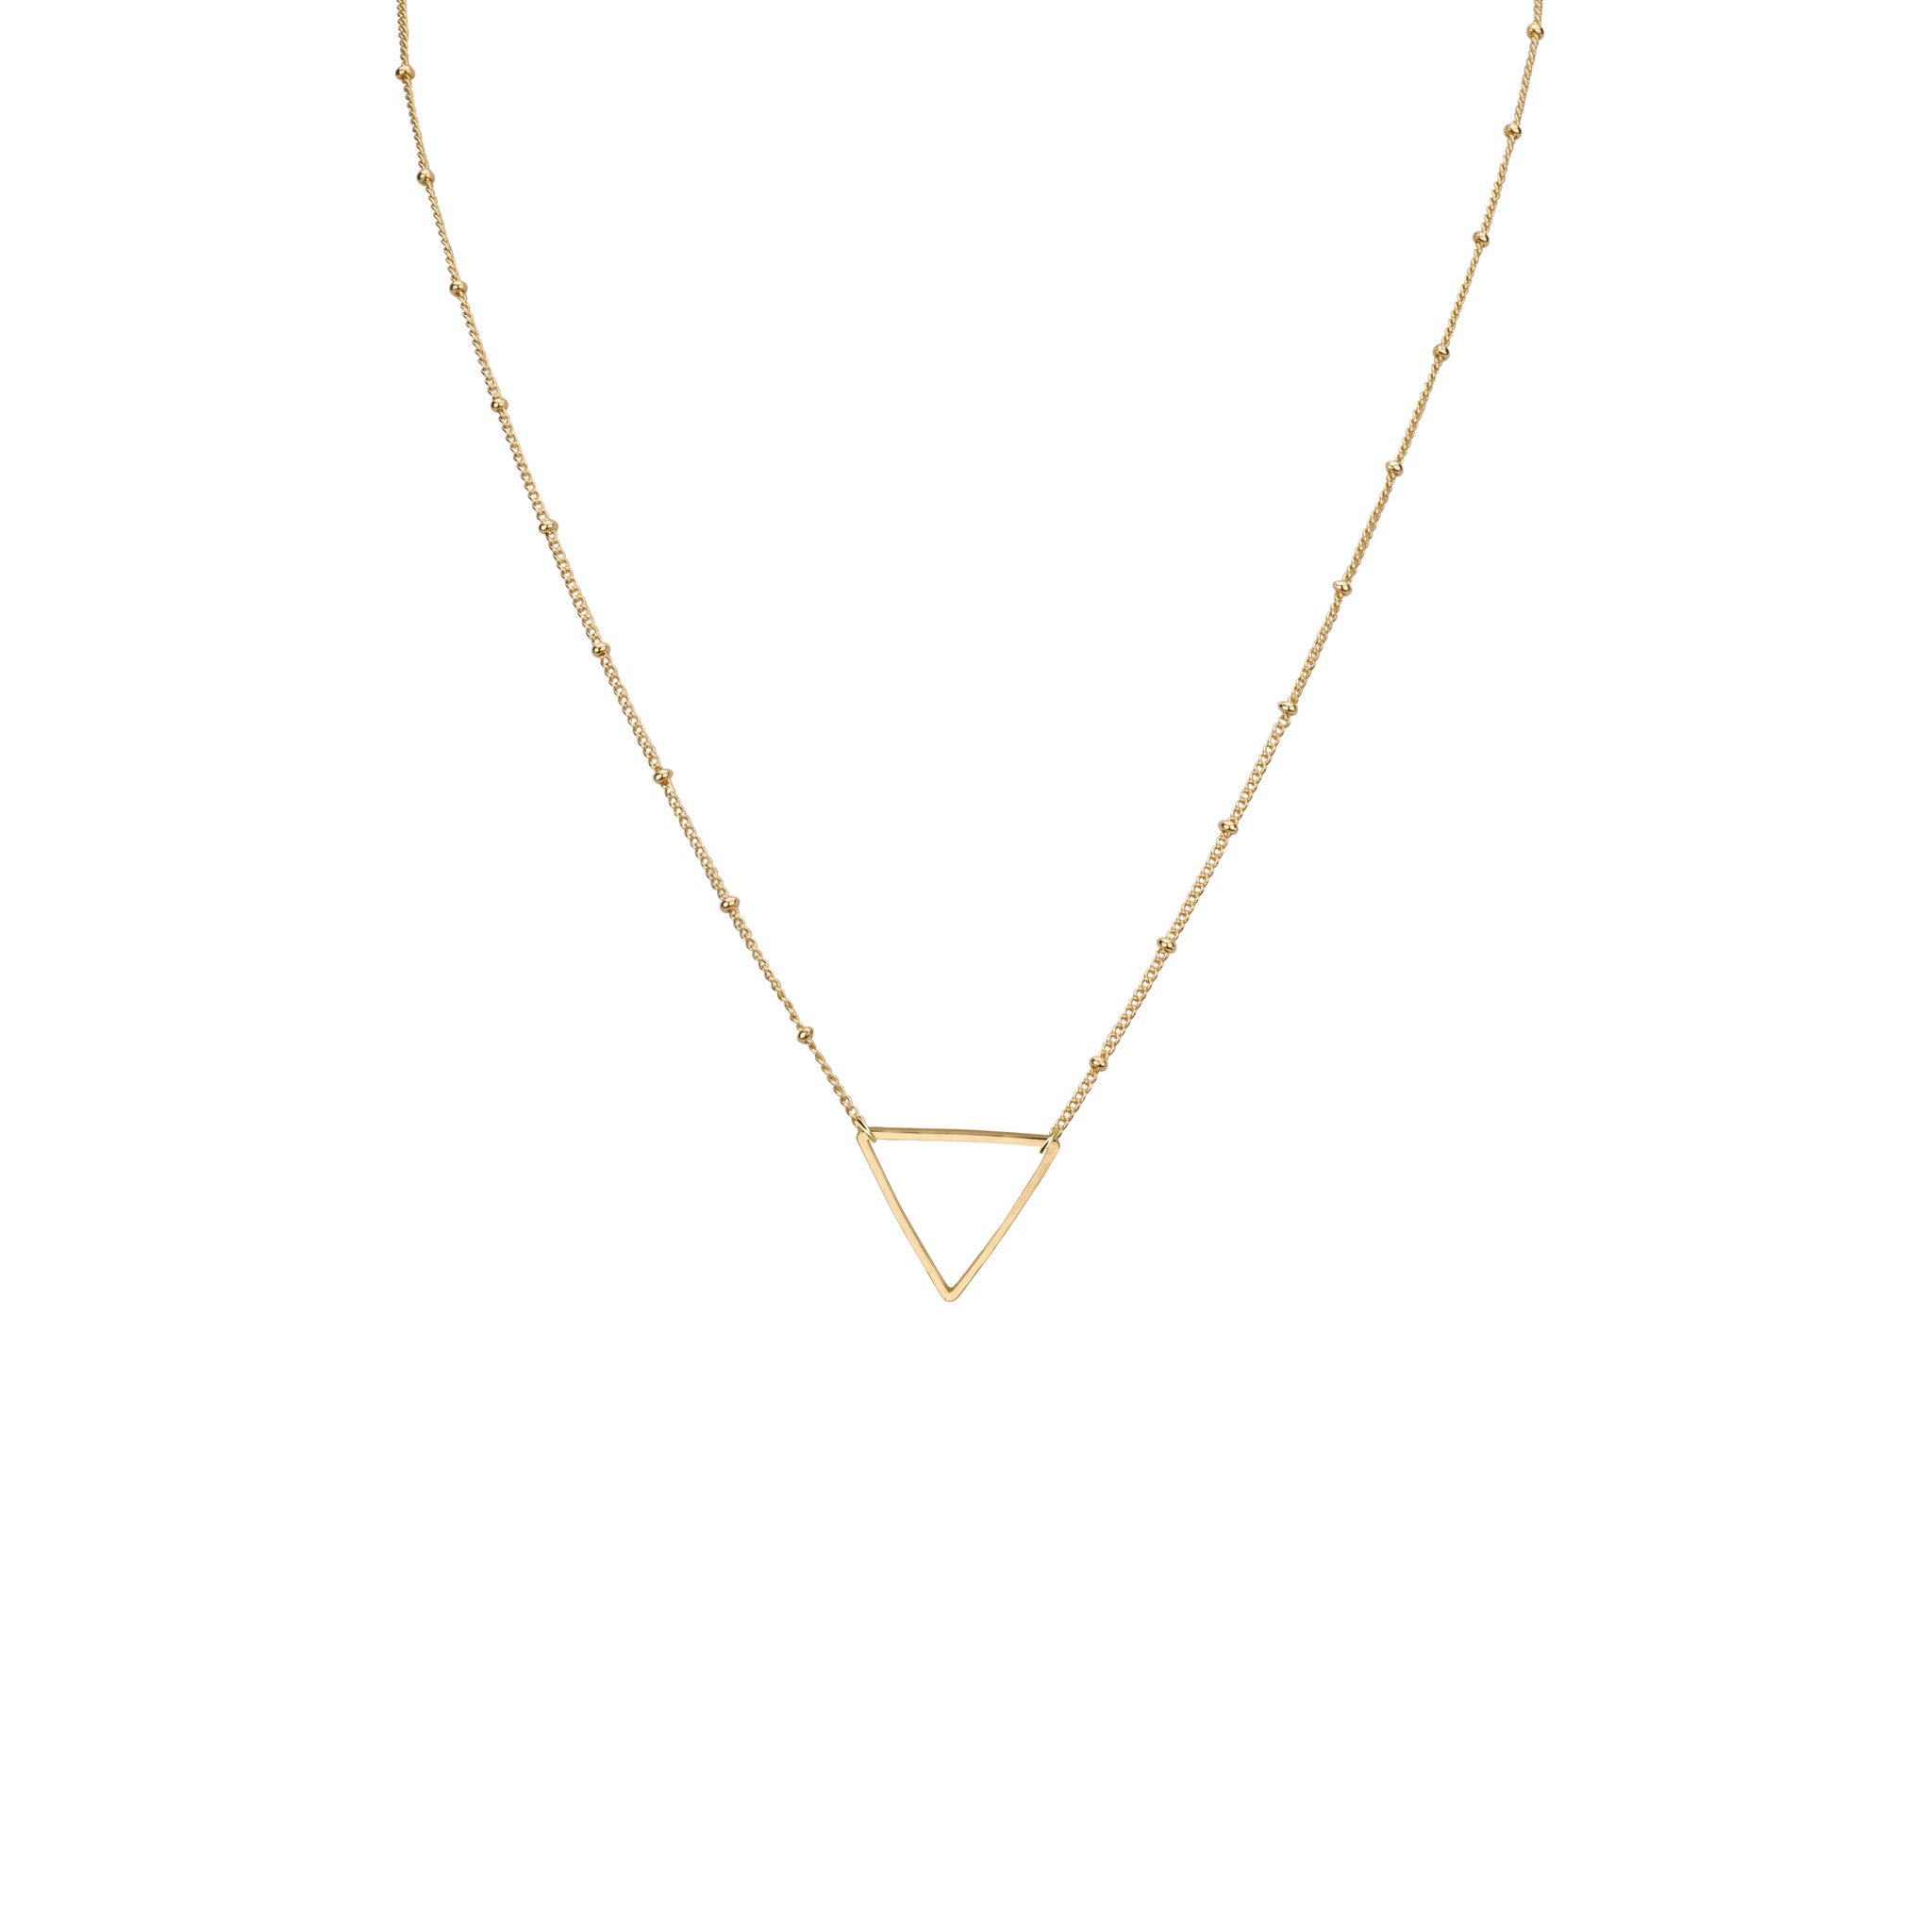 Necklaces - Medium Triangle Outline Pendant & Helen Chain Necklace